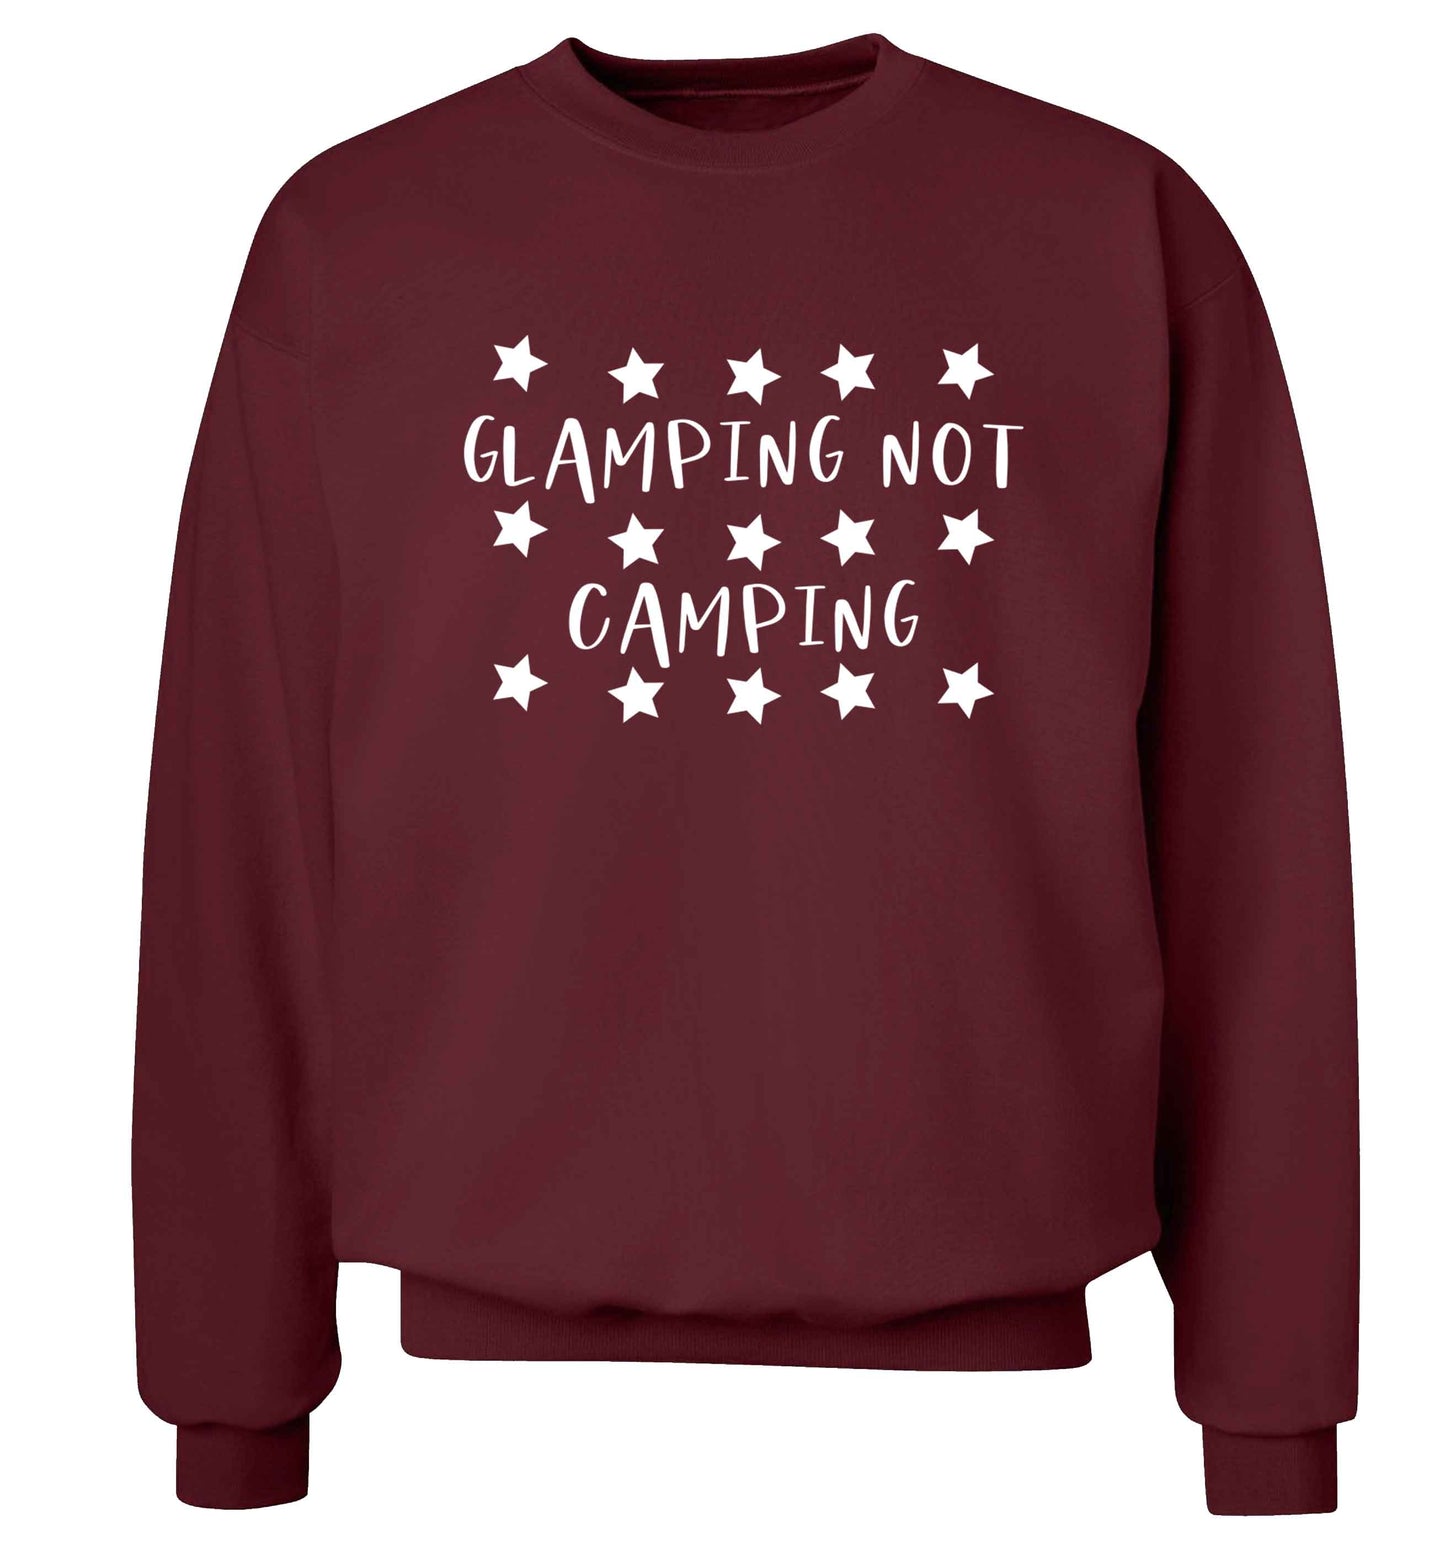 Glamping not camping Adult's unisex maroon Sweater 2XL